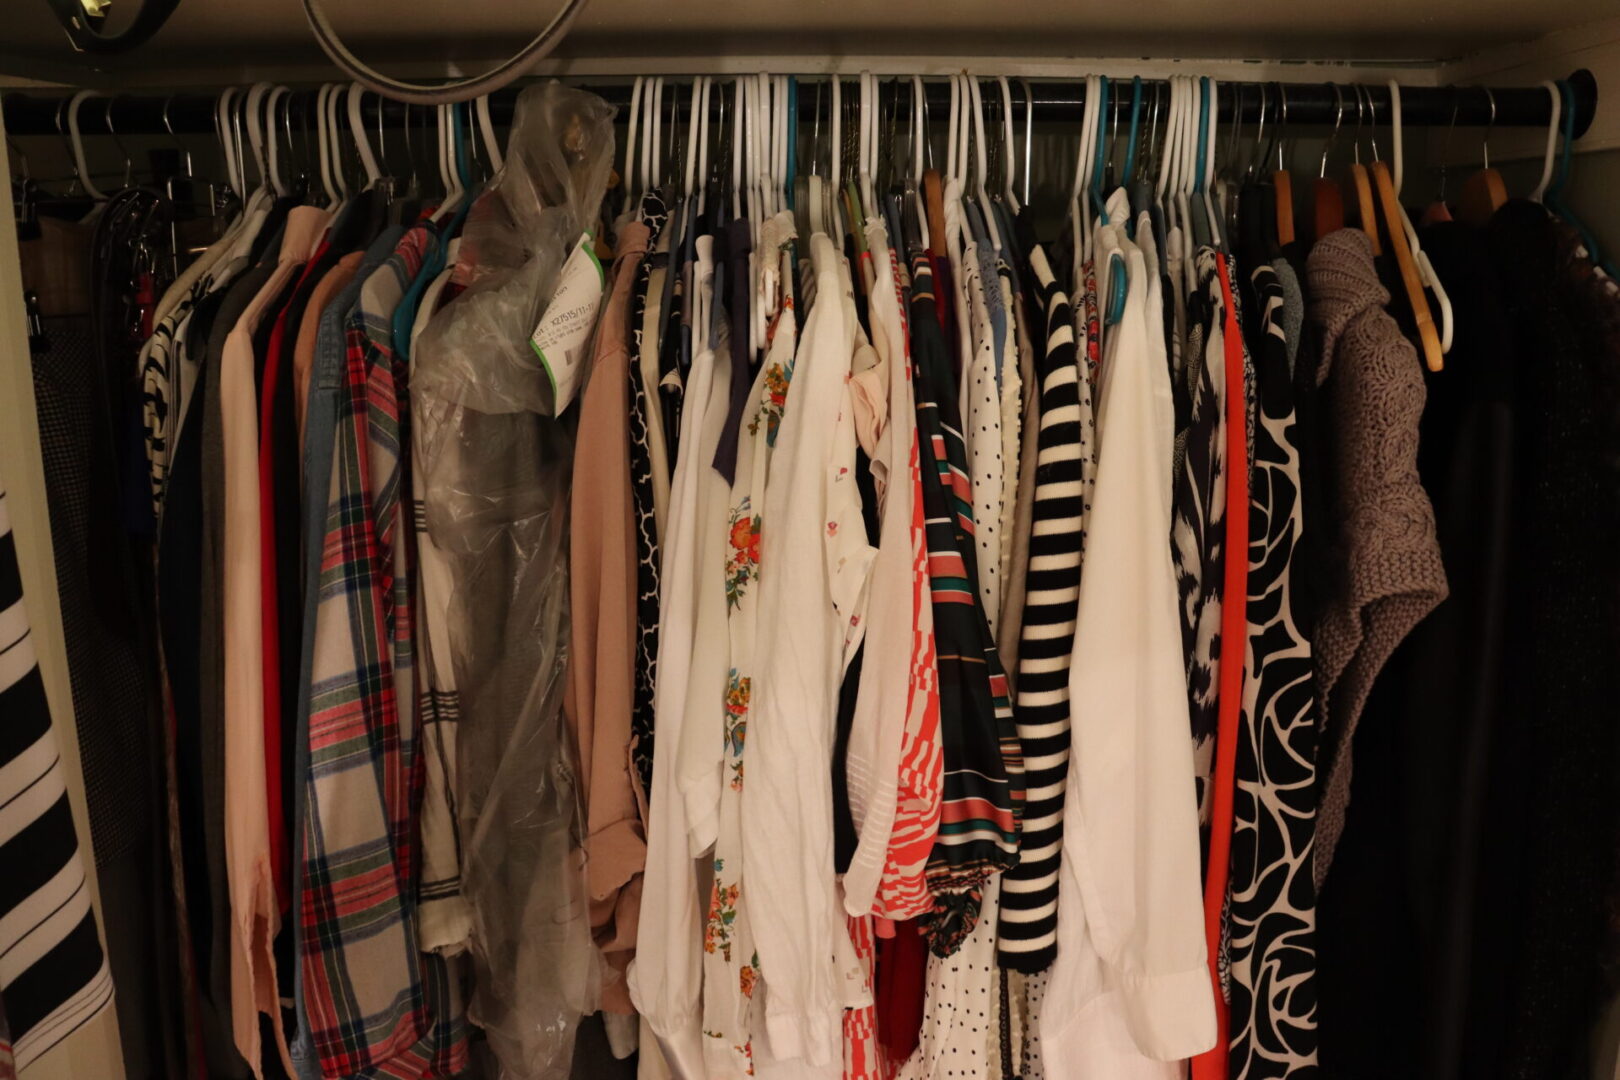 Hanger closet with assorted clothes